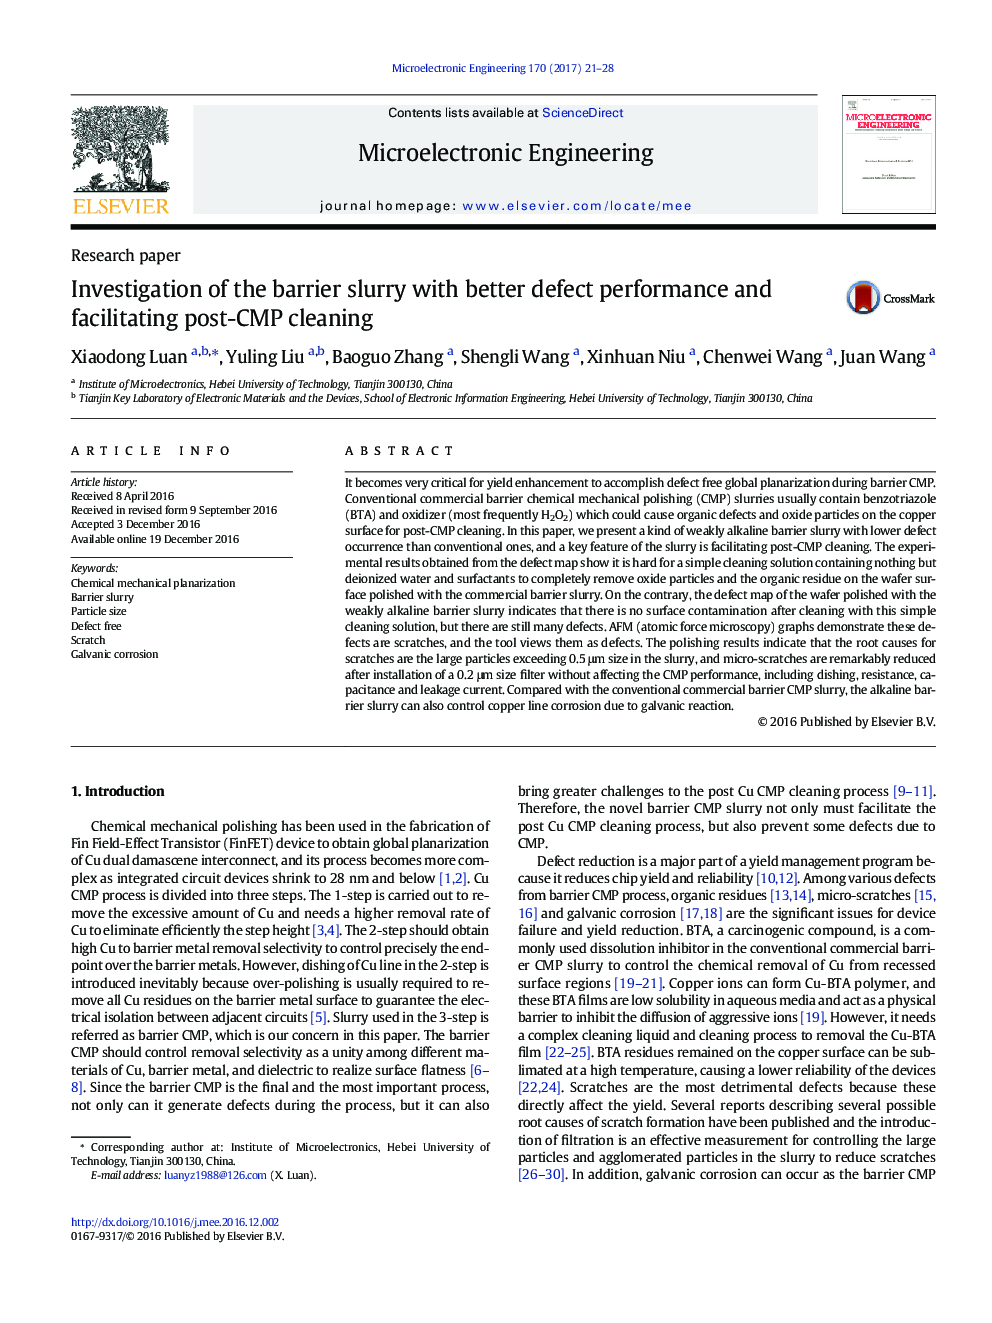 Investigation of the barrier slurry with better defect performance and facilitating post-CMP cleaning